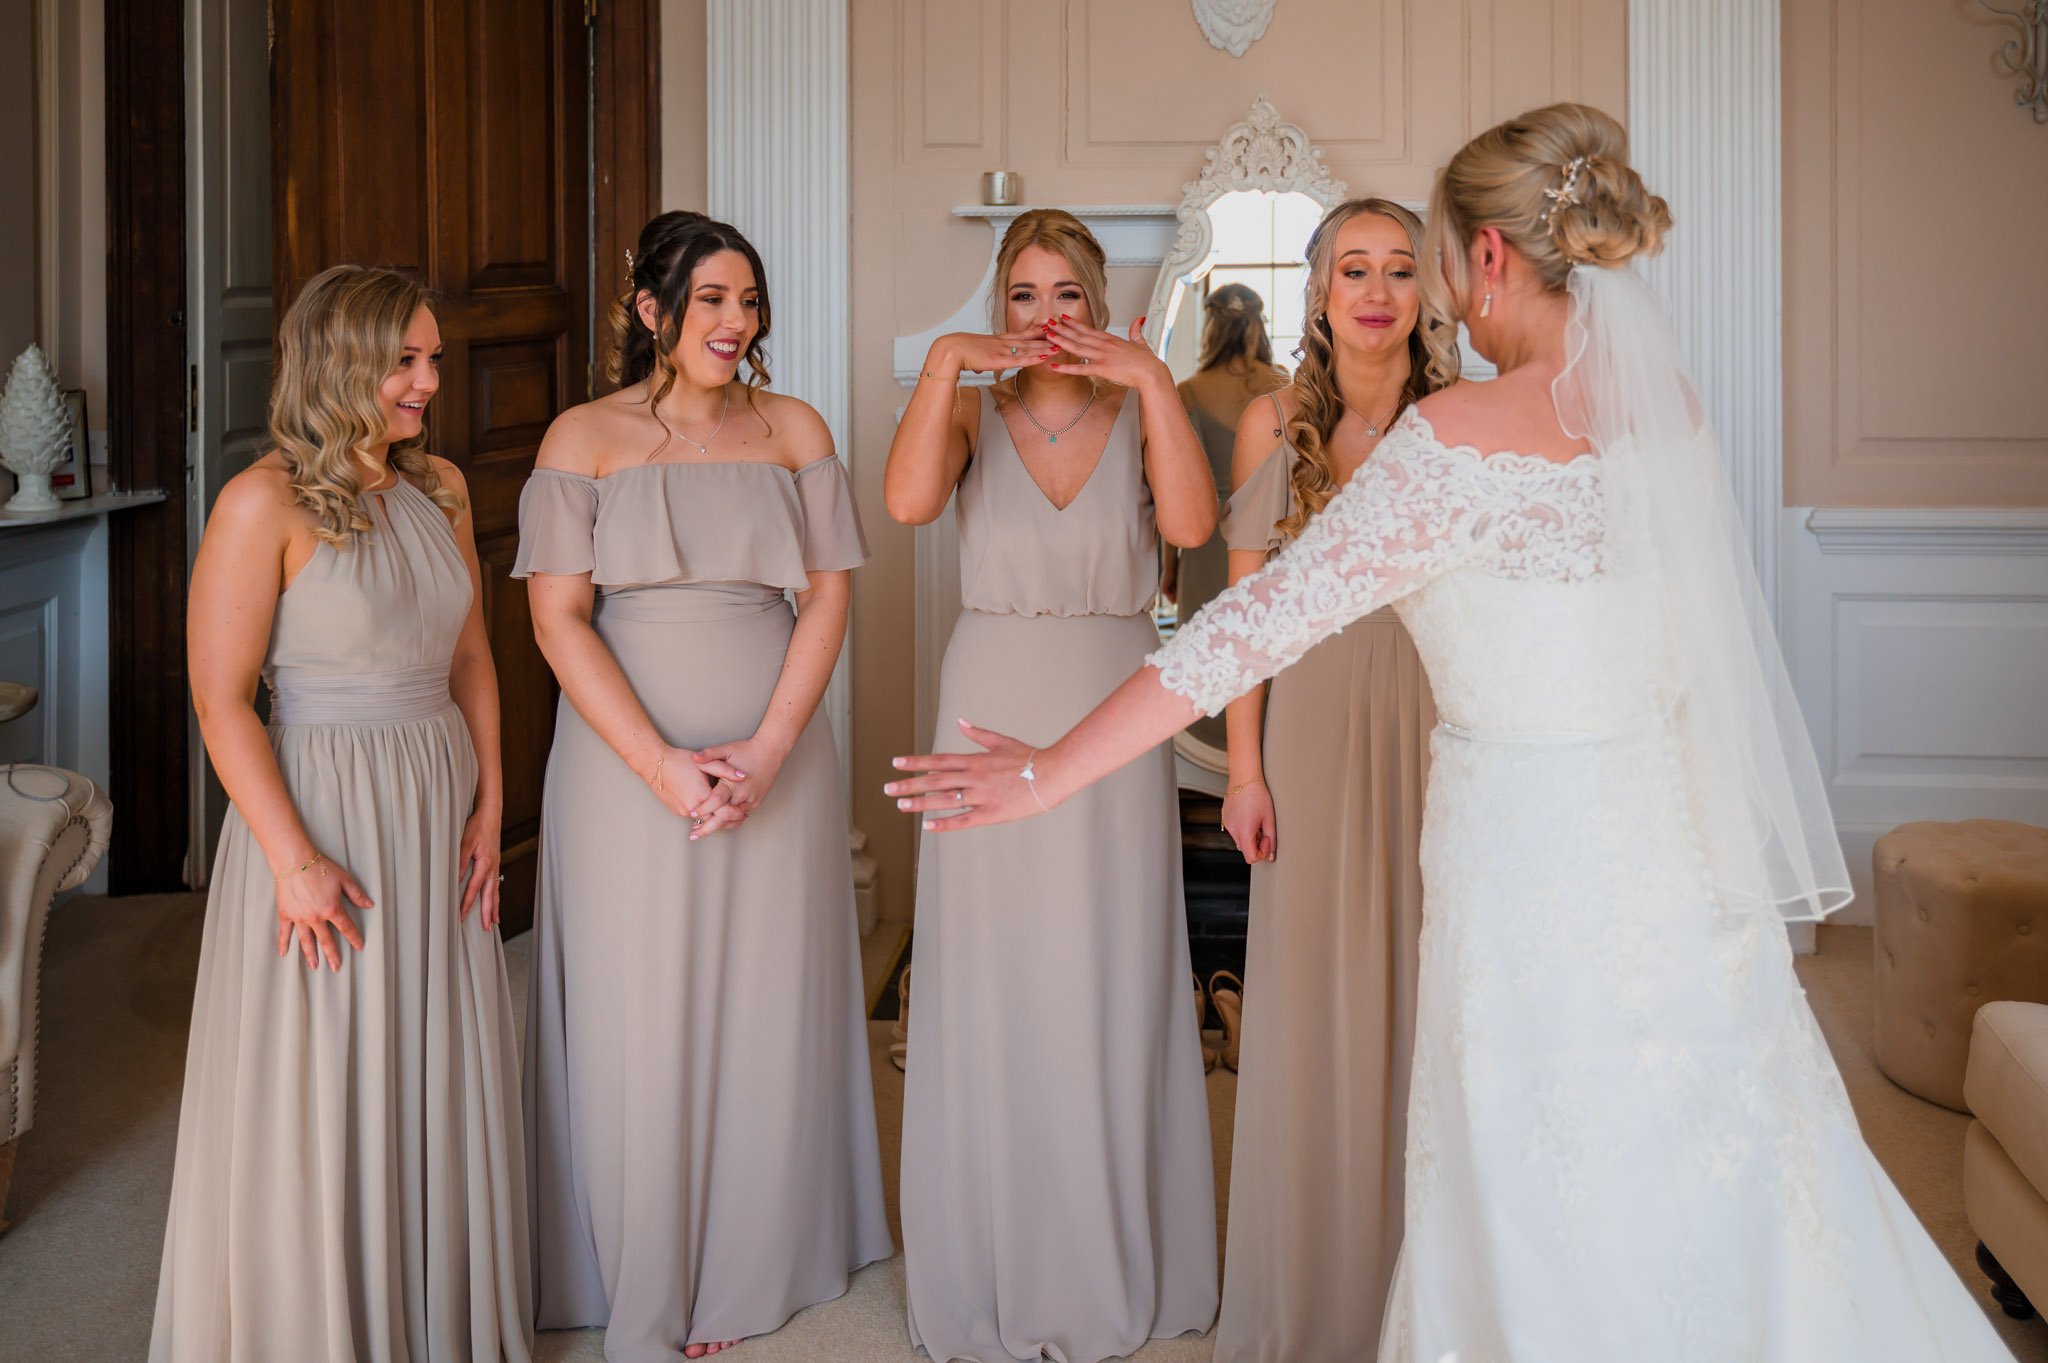 Bridesmaids get emotional at the first look